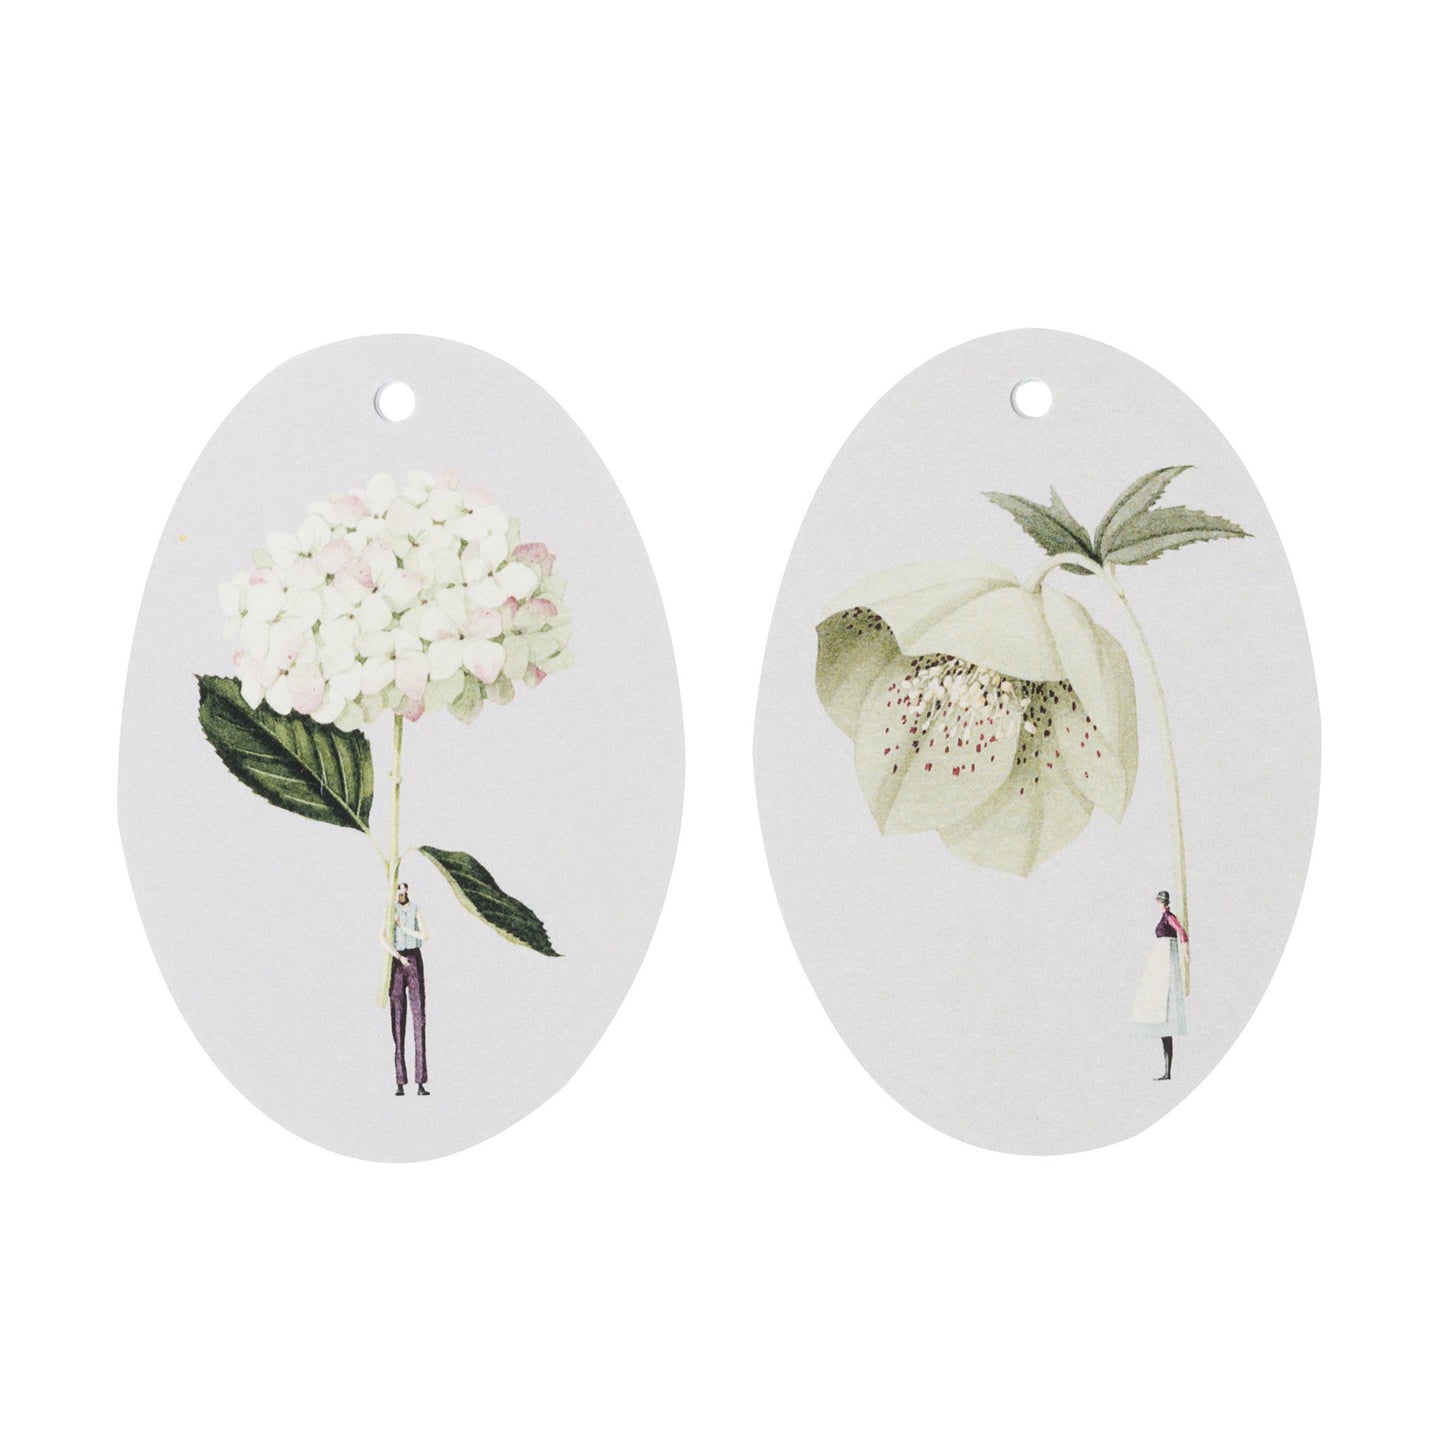 gift tags, tags, green flowers, flowers, made in england, illustration